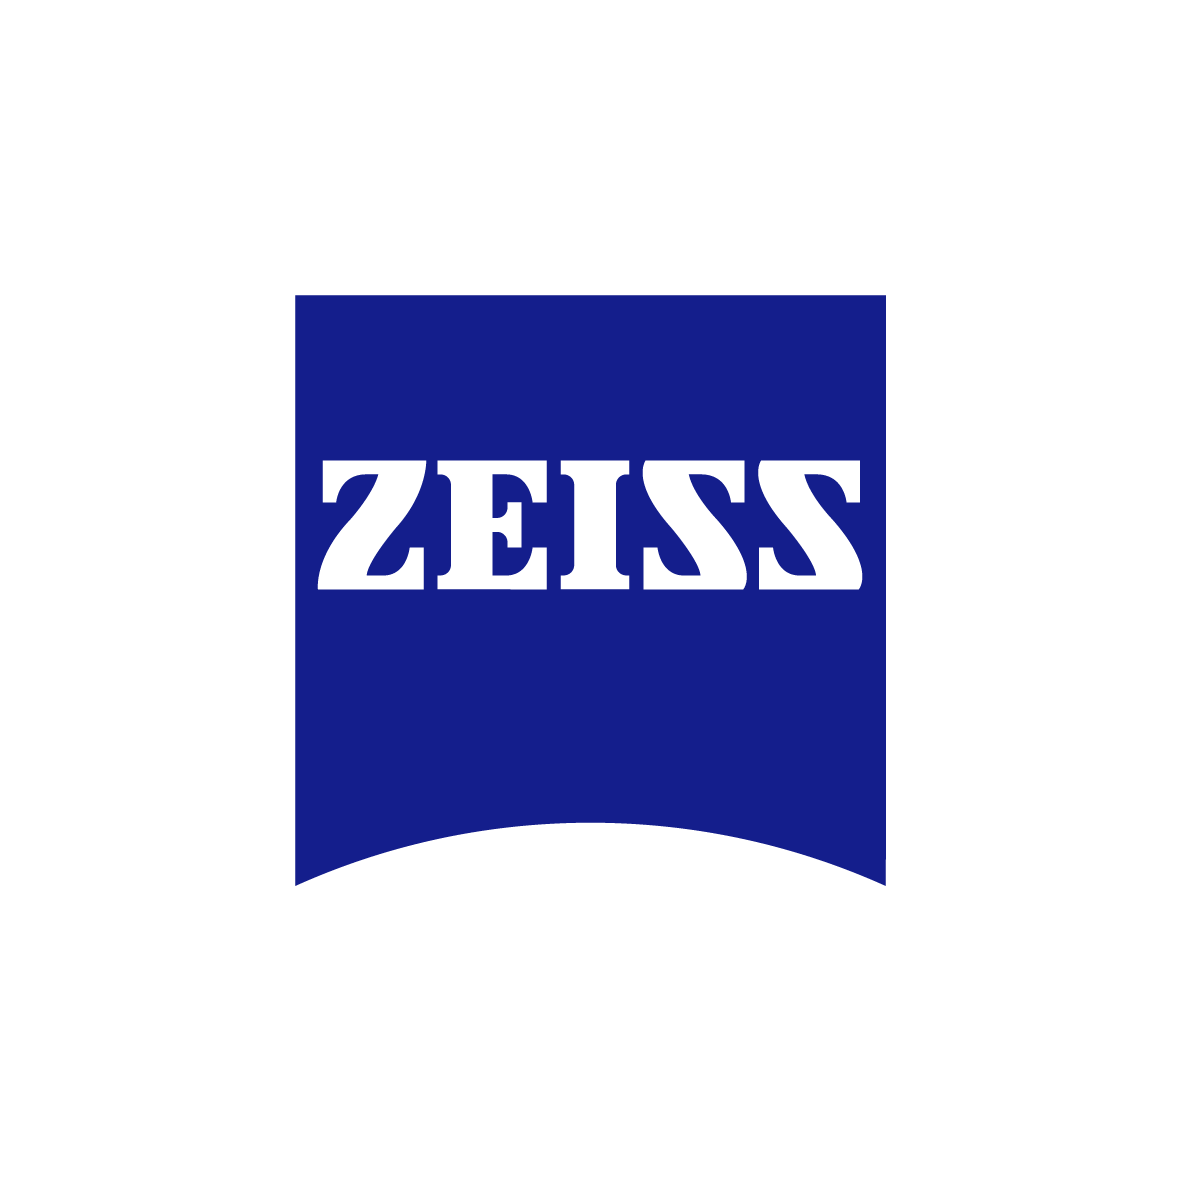 ZEISS Gearing up for 2020 SHOT Show and Industry Day at the Range